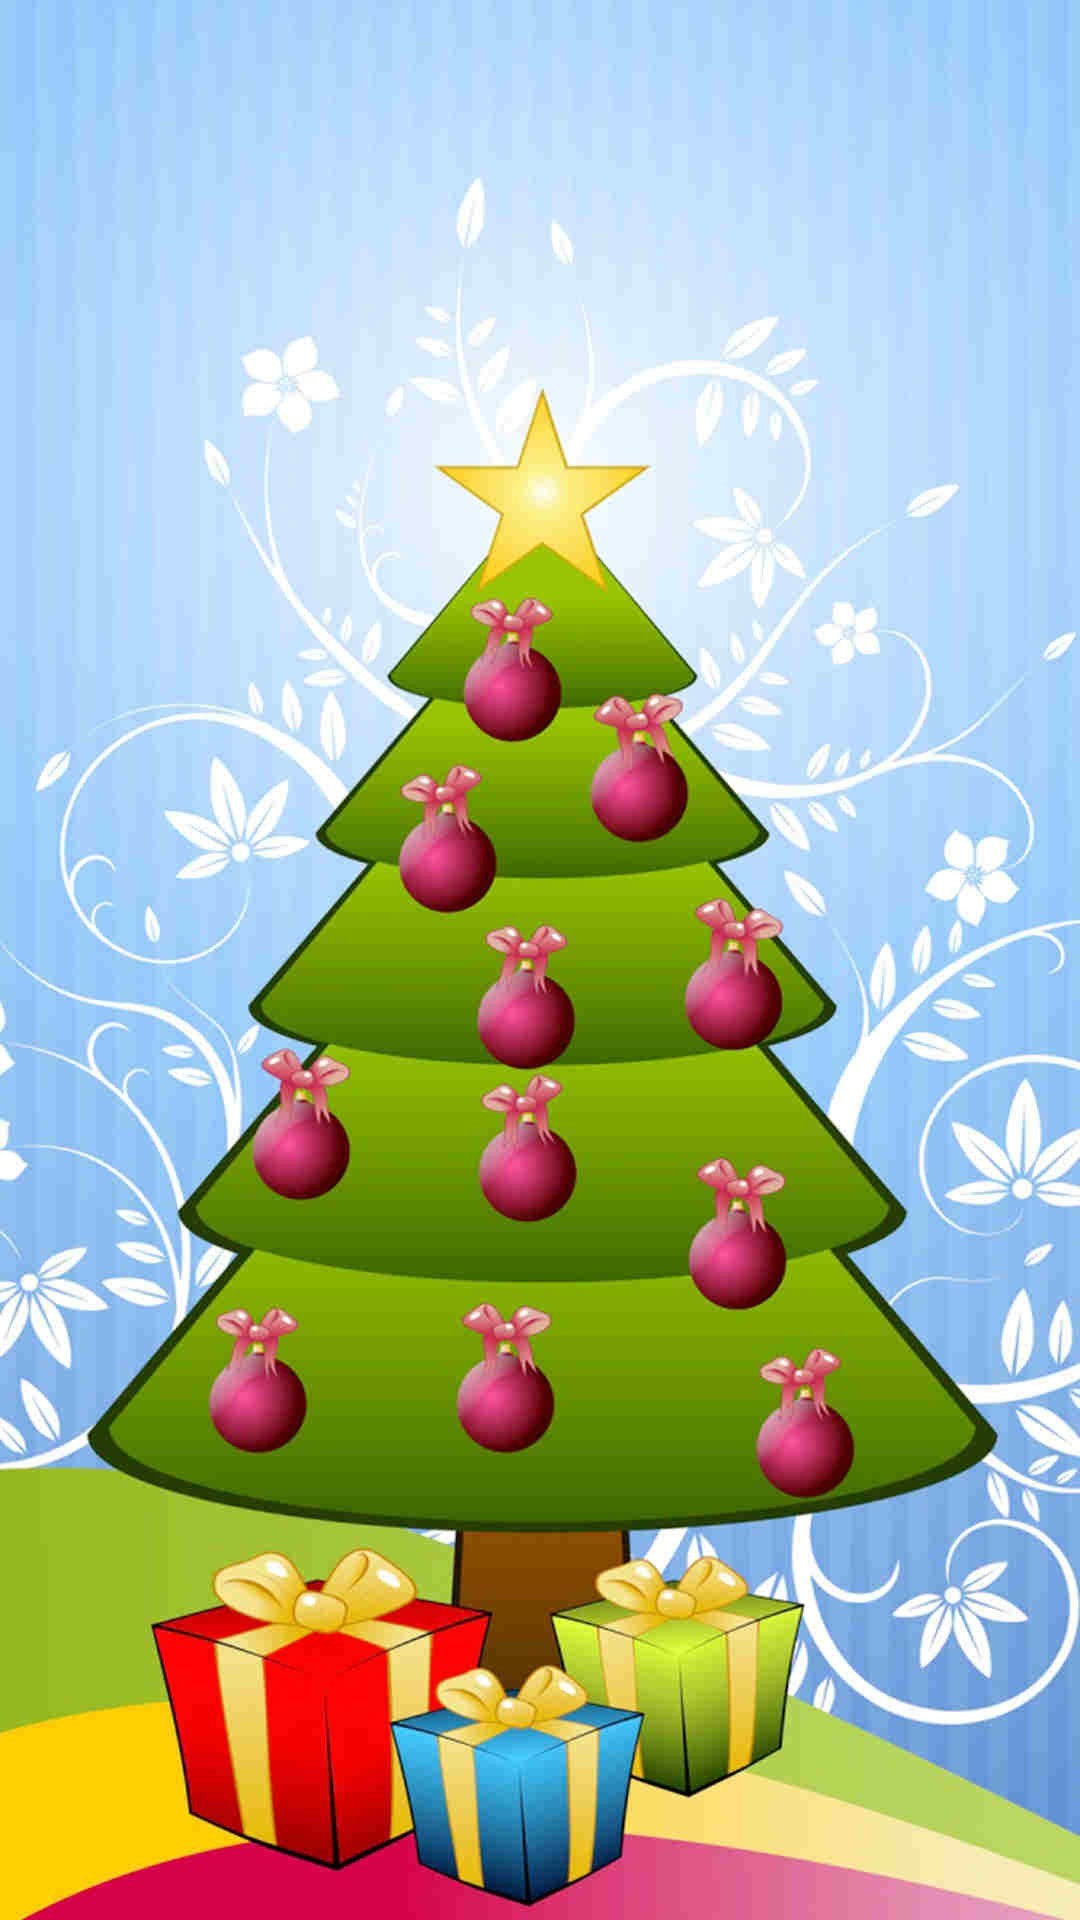 1080x1920 Cute Christmas Wallpapers For Iphone 6 : Cute christmas iphone s wallpaper